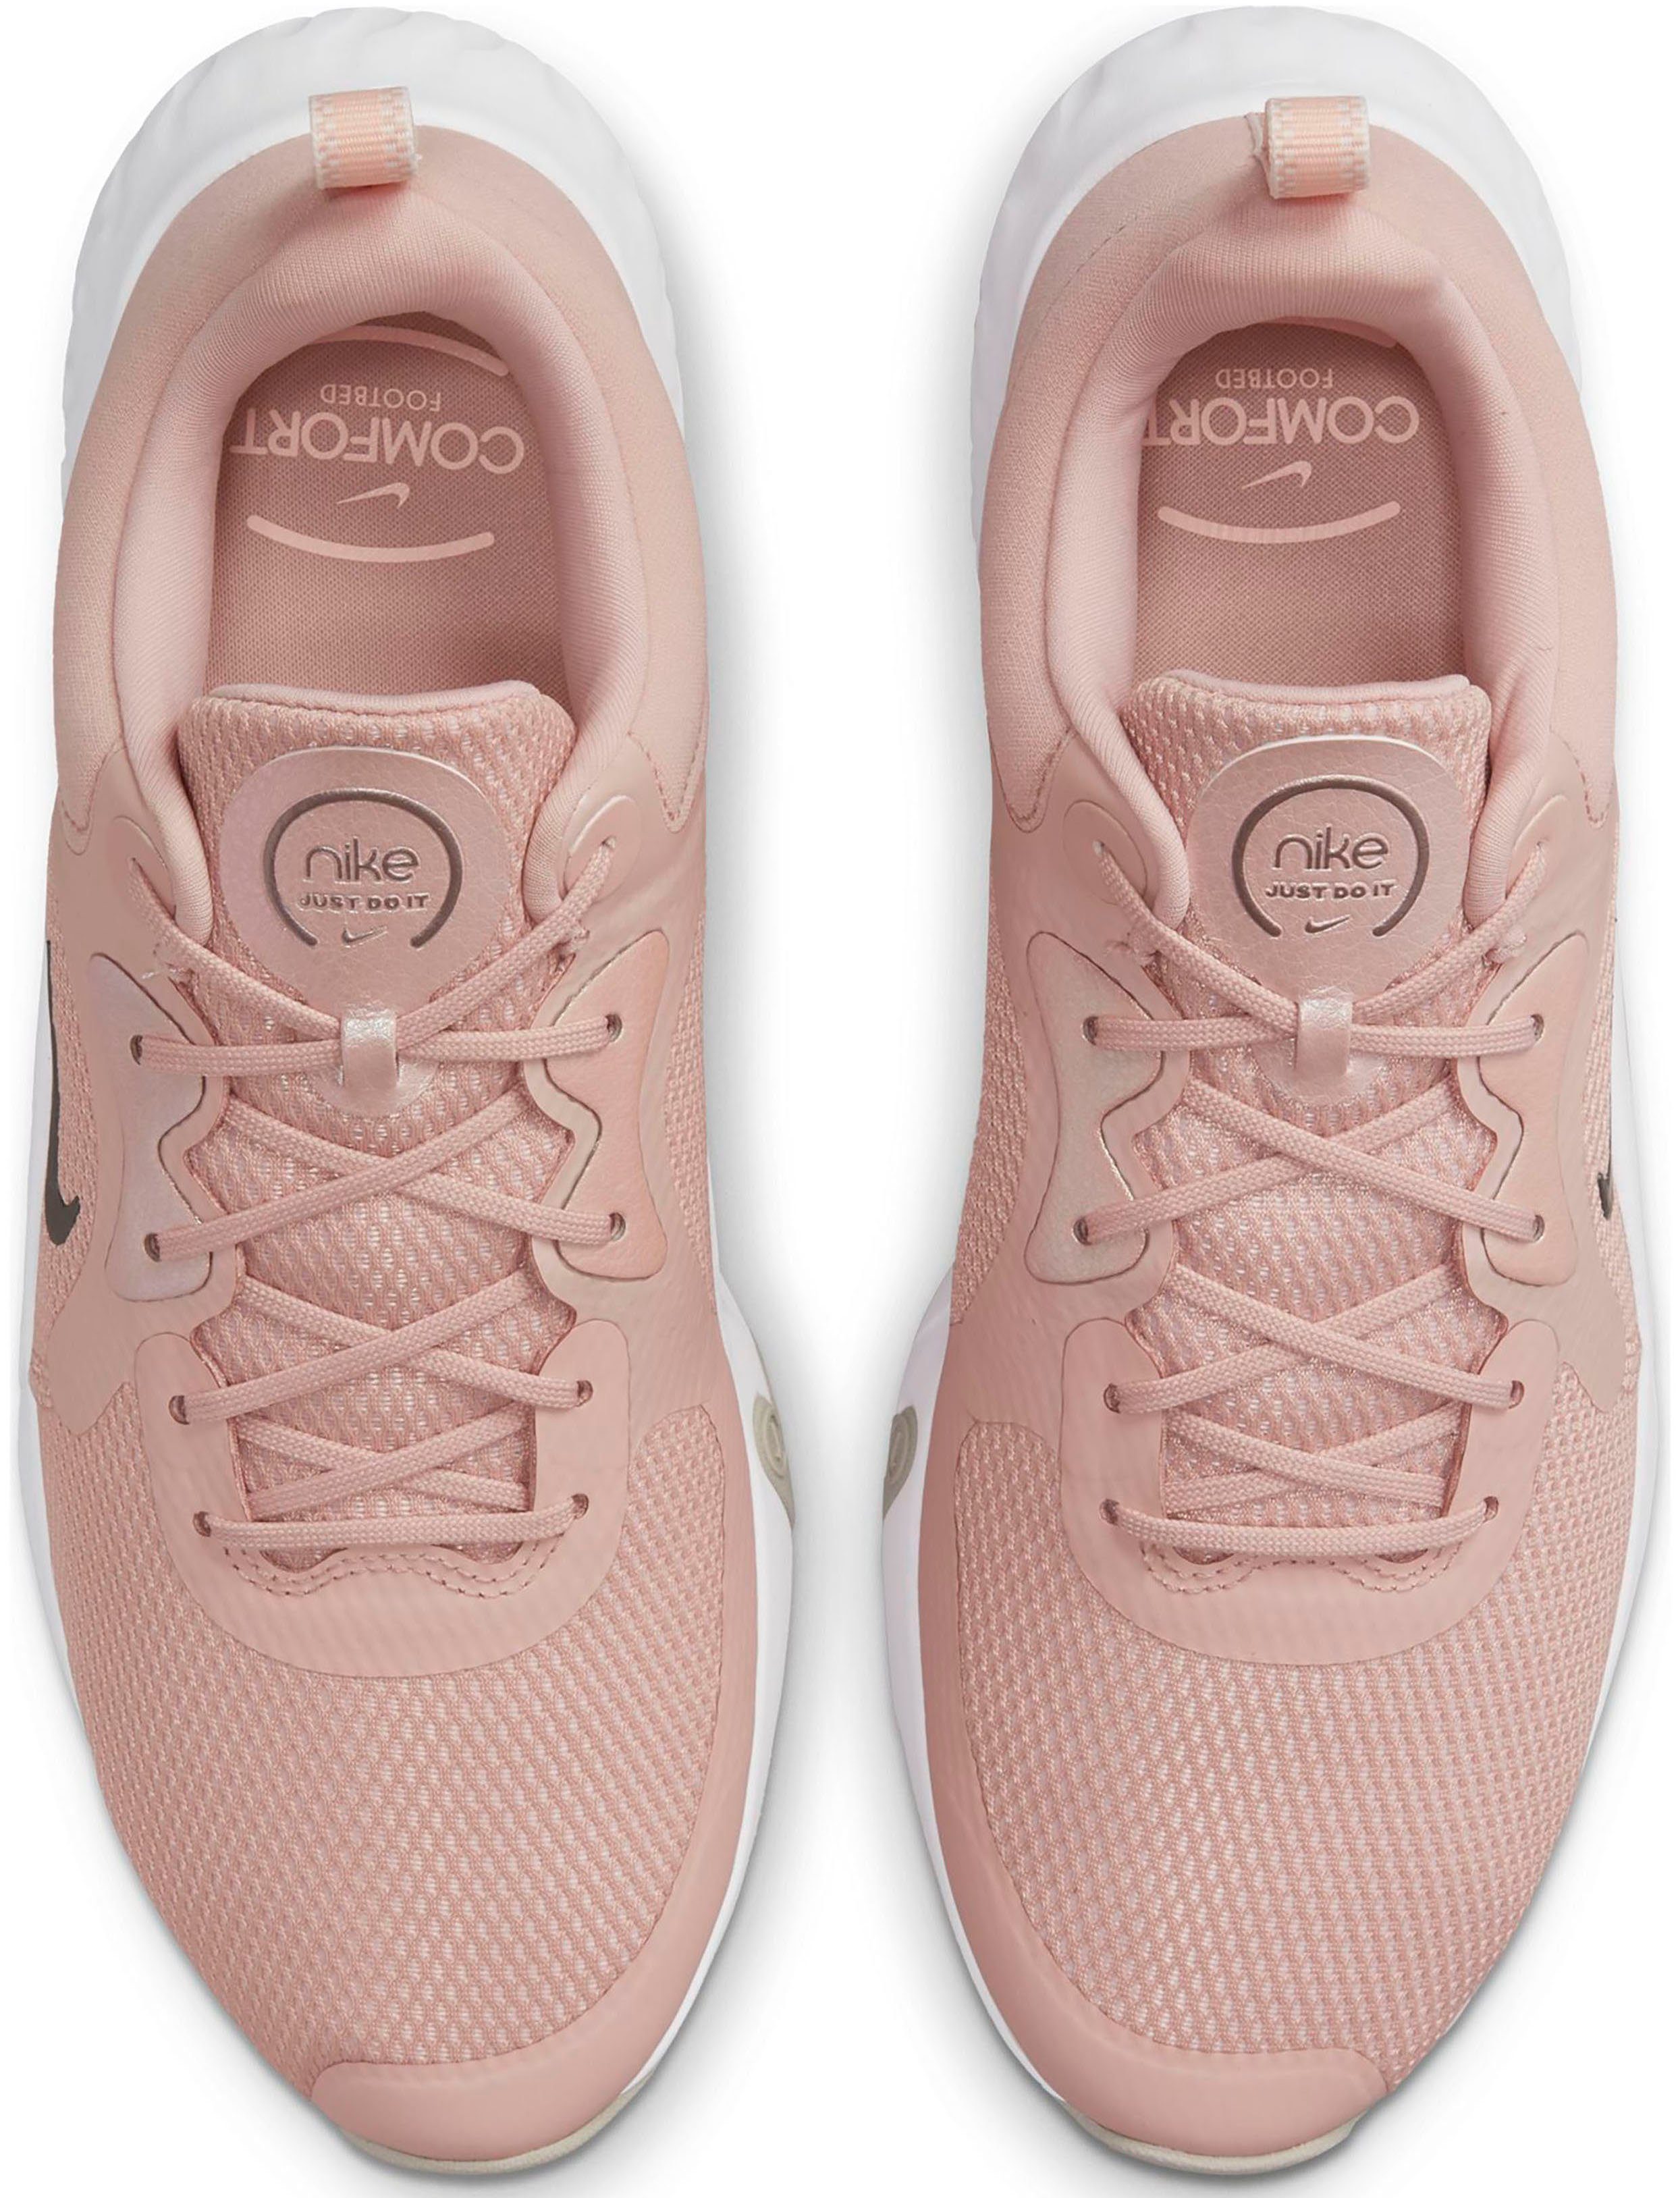 Nike RENEW PINK-OXFORD-MTLC-PEWTER-PALE-CORAL-WHITE 11 Fitnessschuh IN-SEASON TR